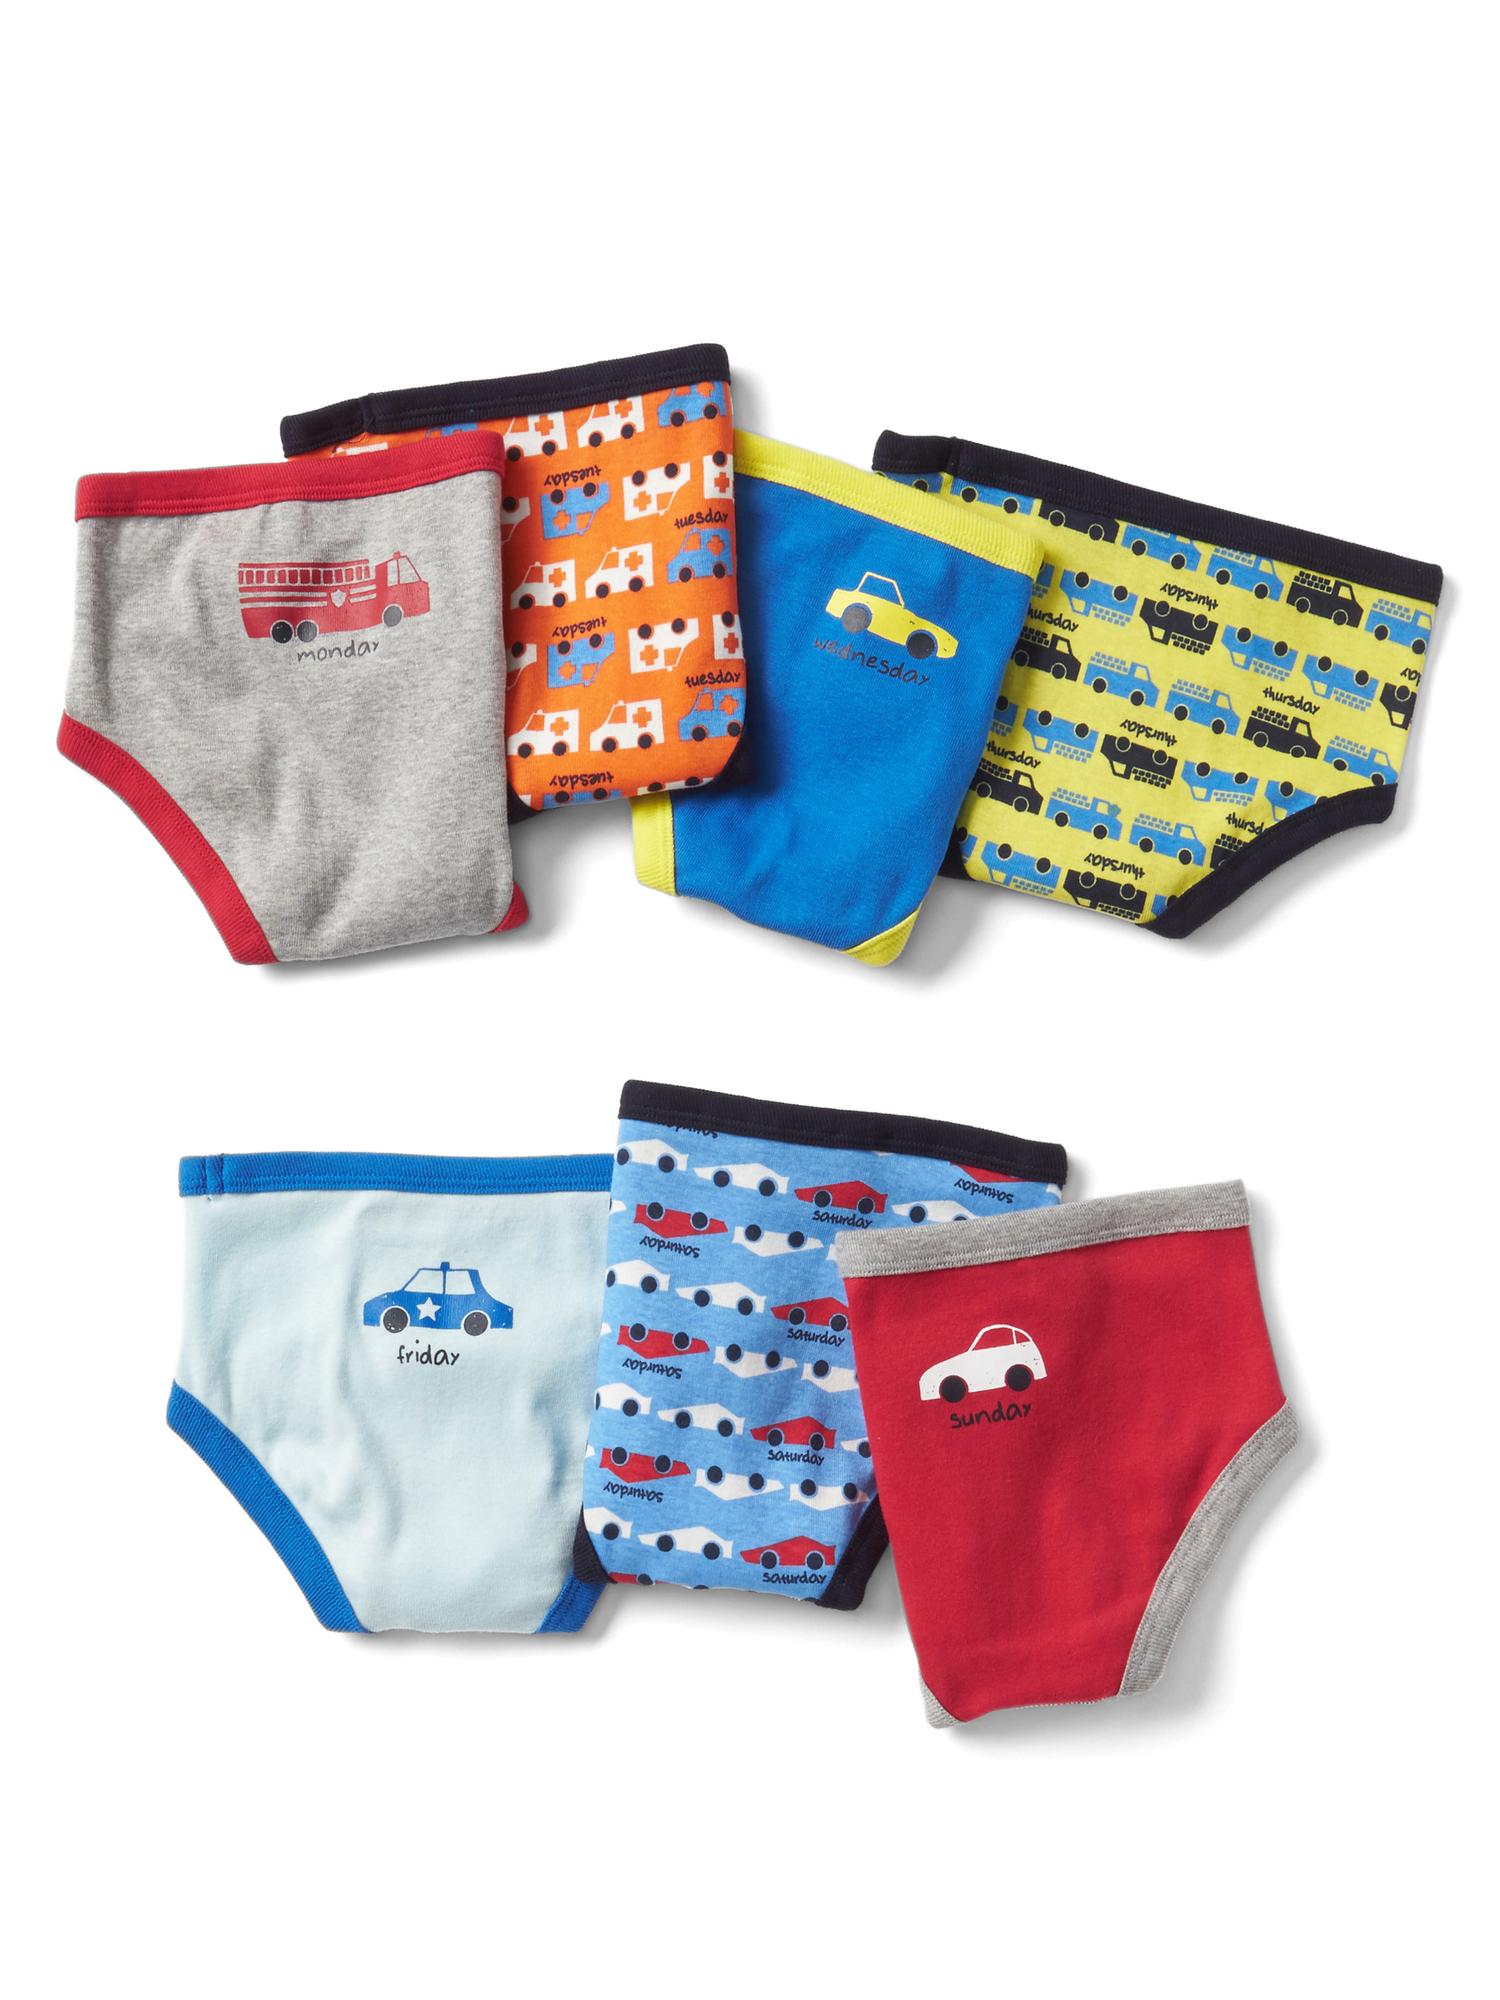 GAP KIDS 'DAYS OF THE WEEK' UNDERWEAR - NWOT - 2 sets size 8, Other, Calgary